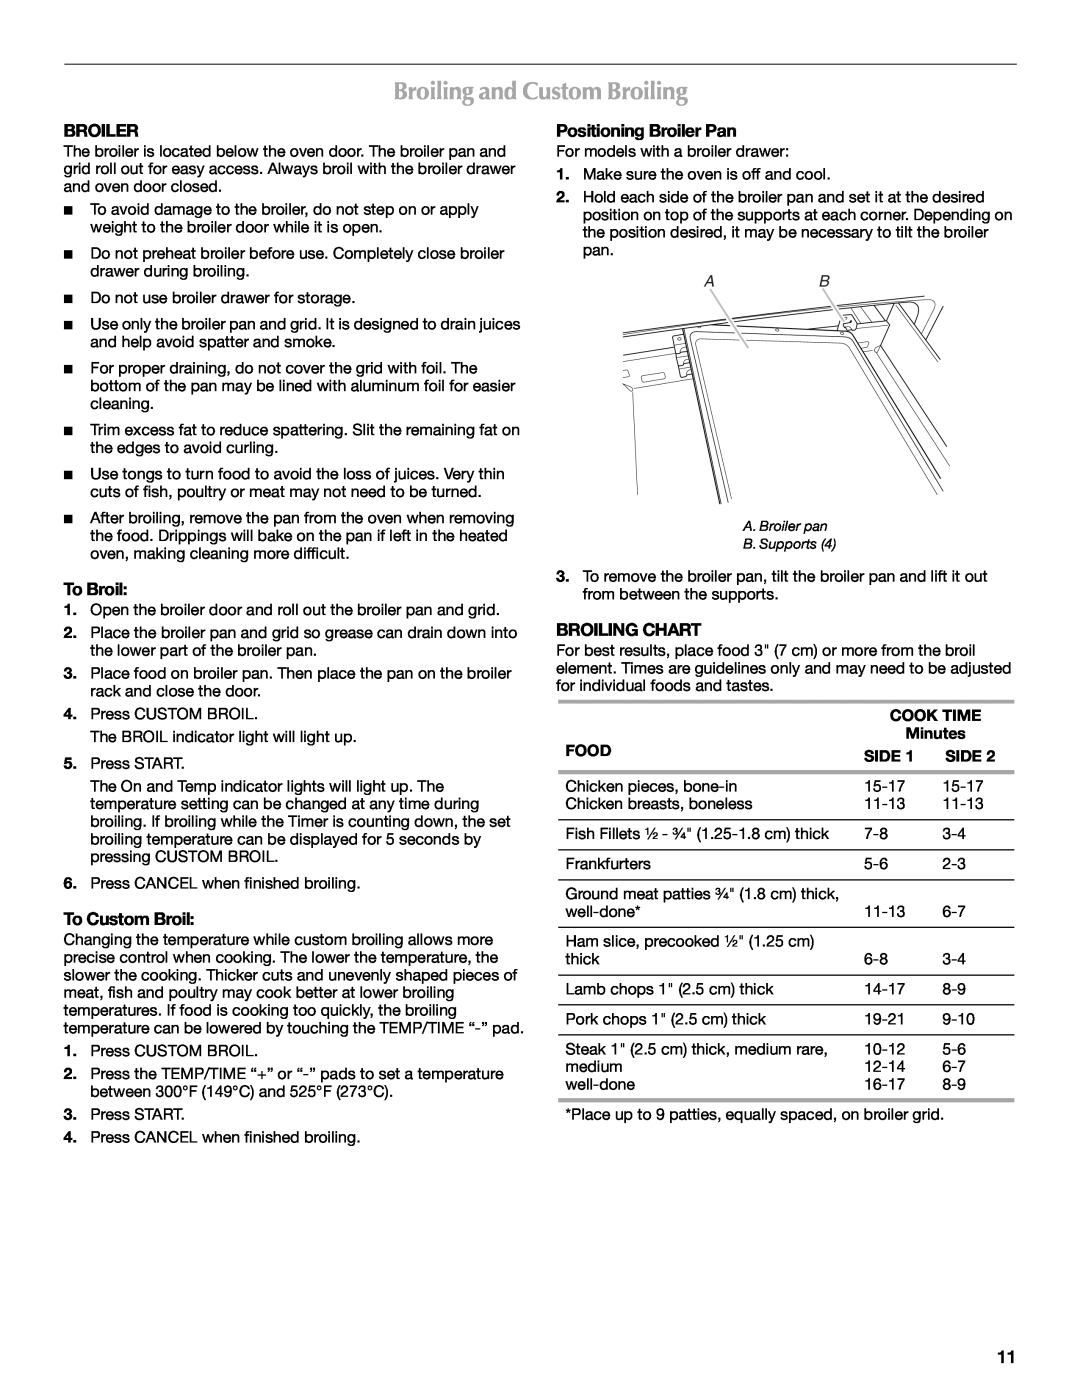 Maytag W10304917A Broiling and Custom Broiling, To Broil, To Custom Broil, Positioning Broiler Pan, Broiling Chart 